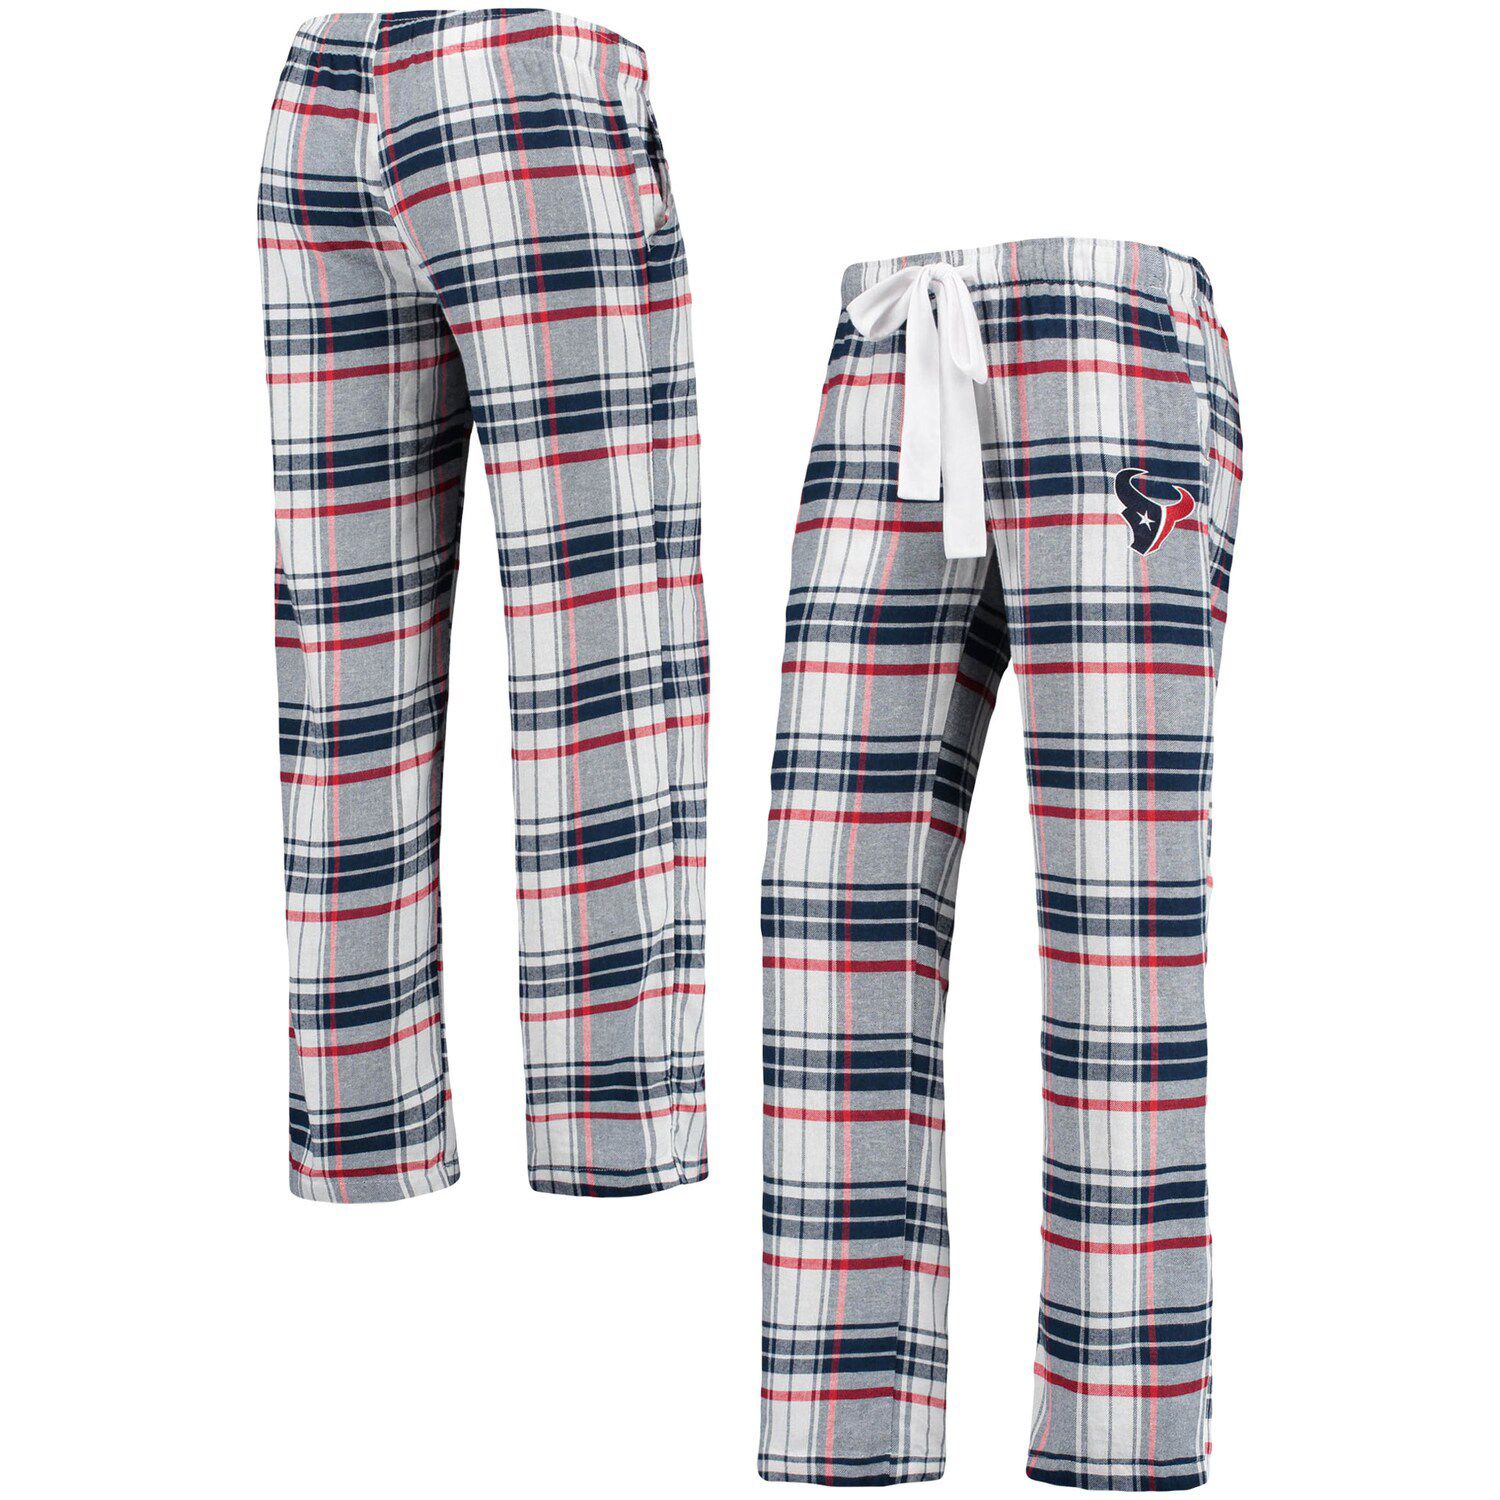 Image for Unbranded Women's Concepts Sport Navy/Red Houston Texans Accolade Flannel Pants at Kohl's.